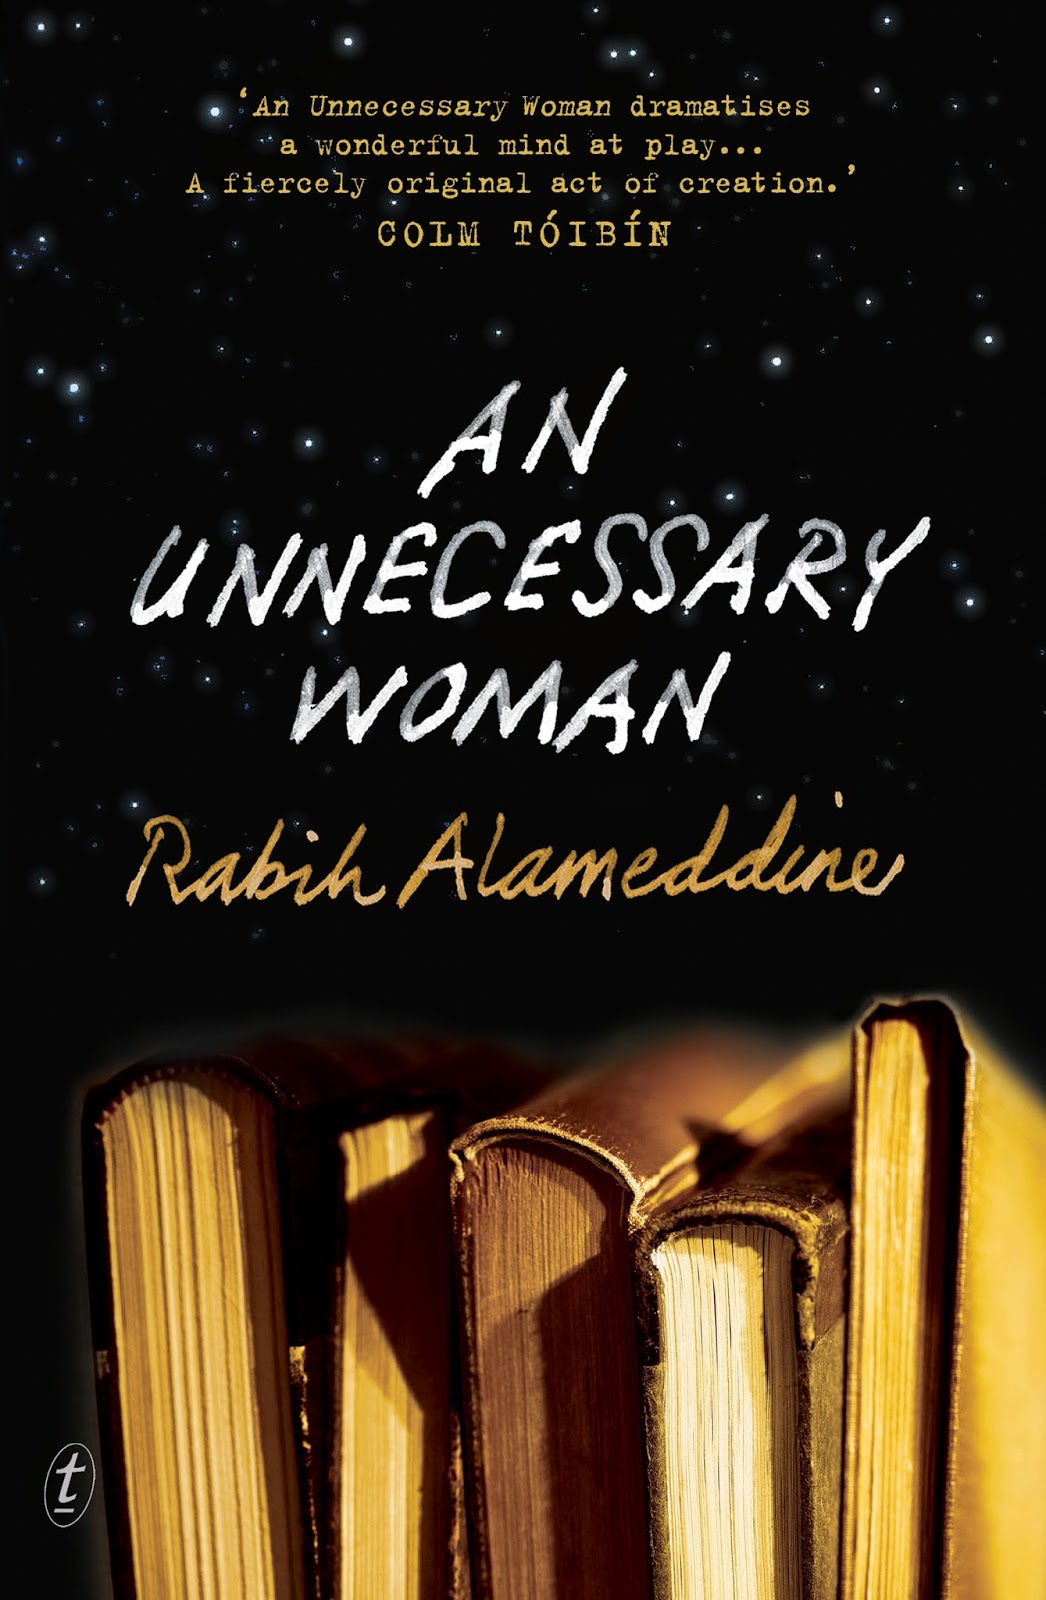 http://discover.halifaxpubliclibraries.ca/?q=title:an%20unnecessary%20woman